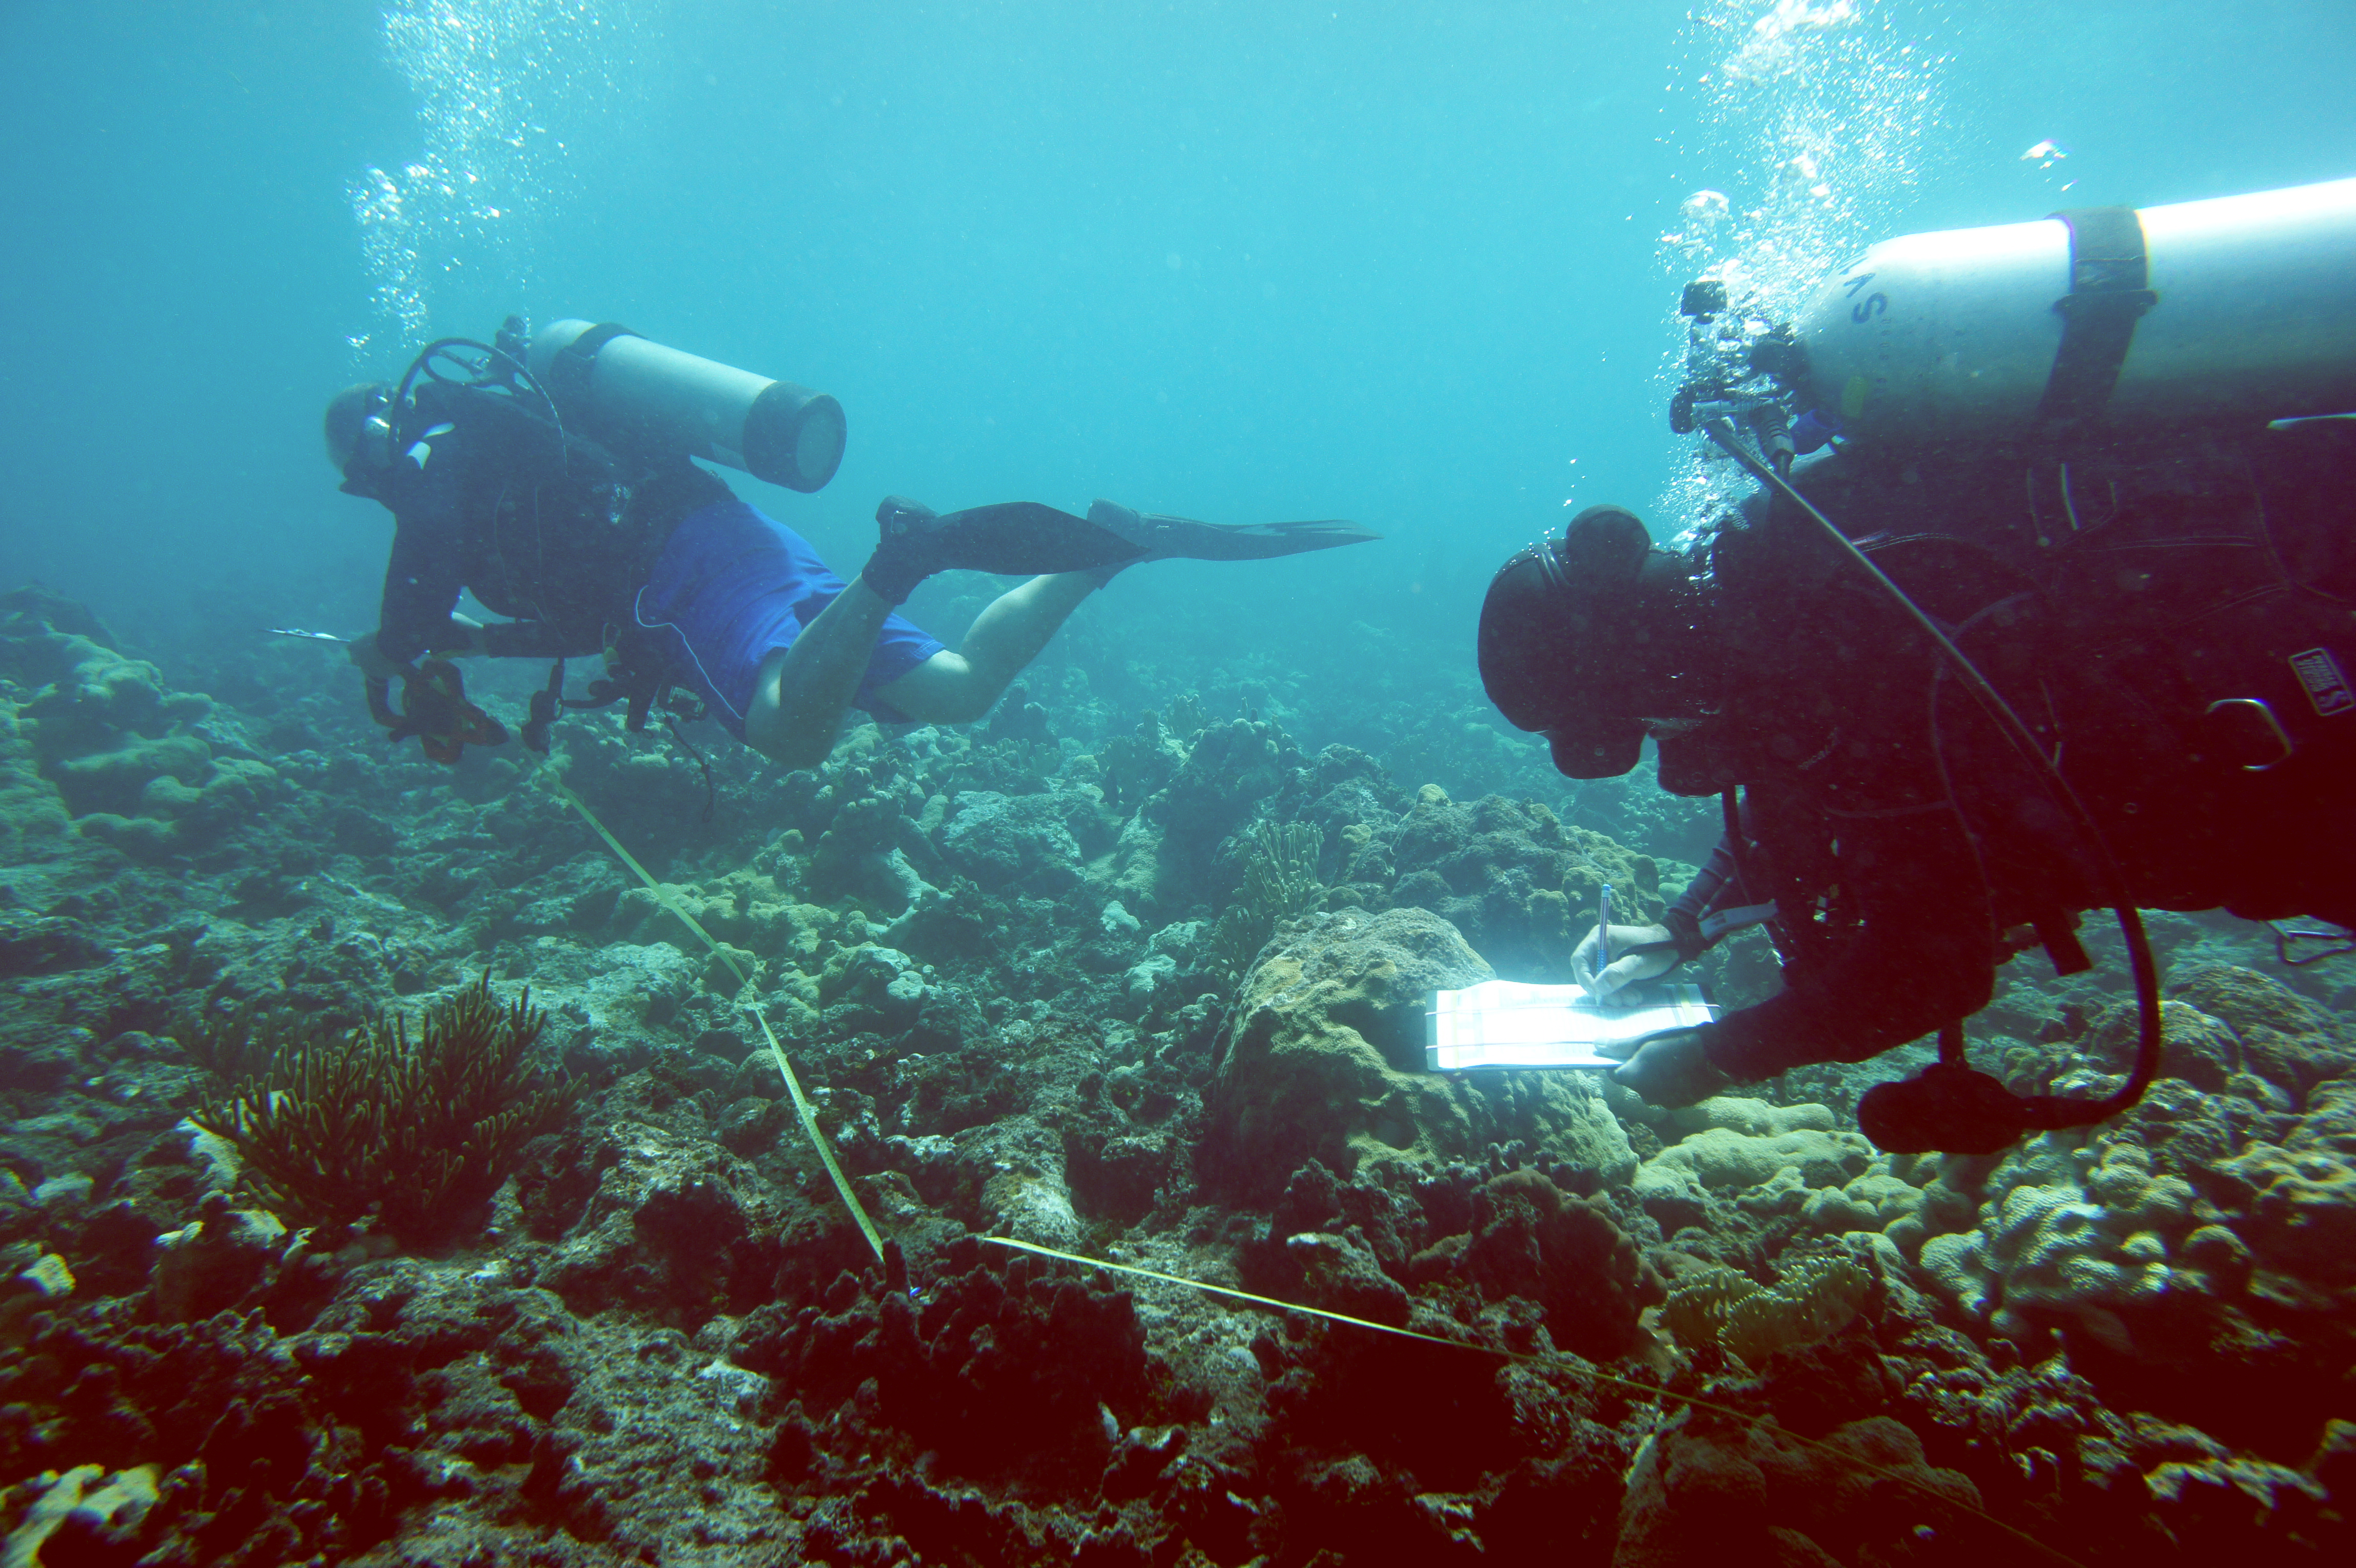 EPA Gives $100K Environmental Education Grant To Support UVI Careers in Marine Sciences